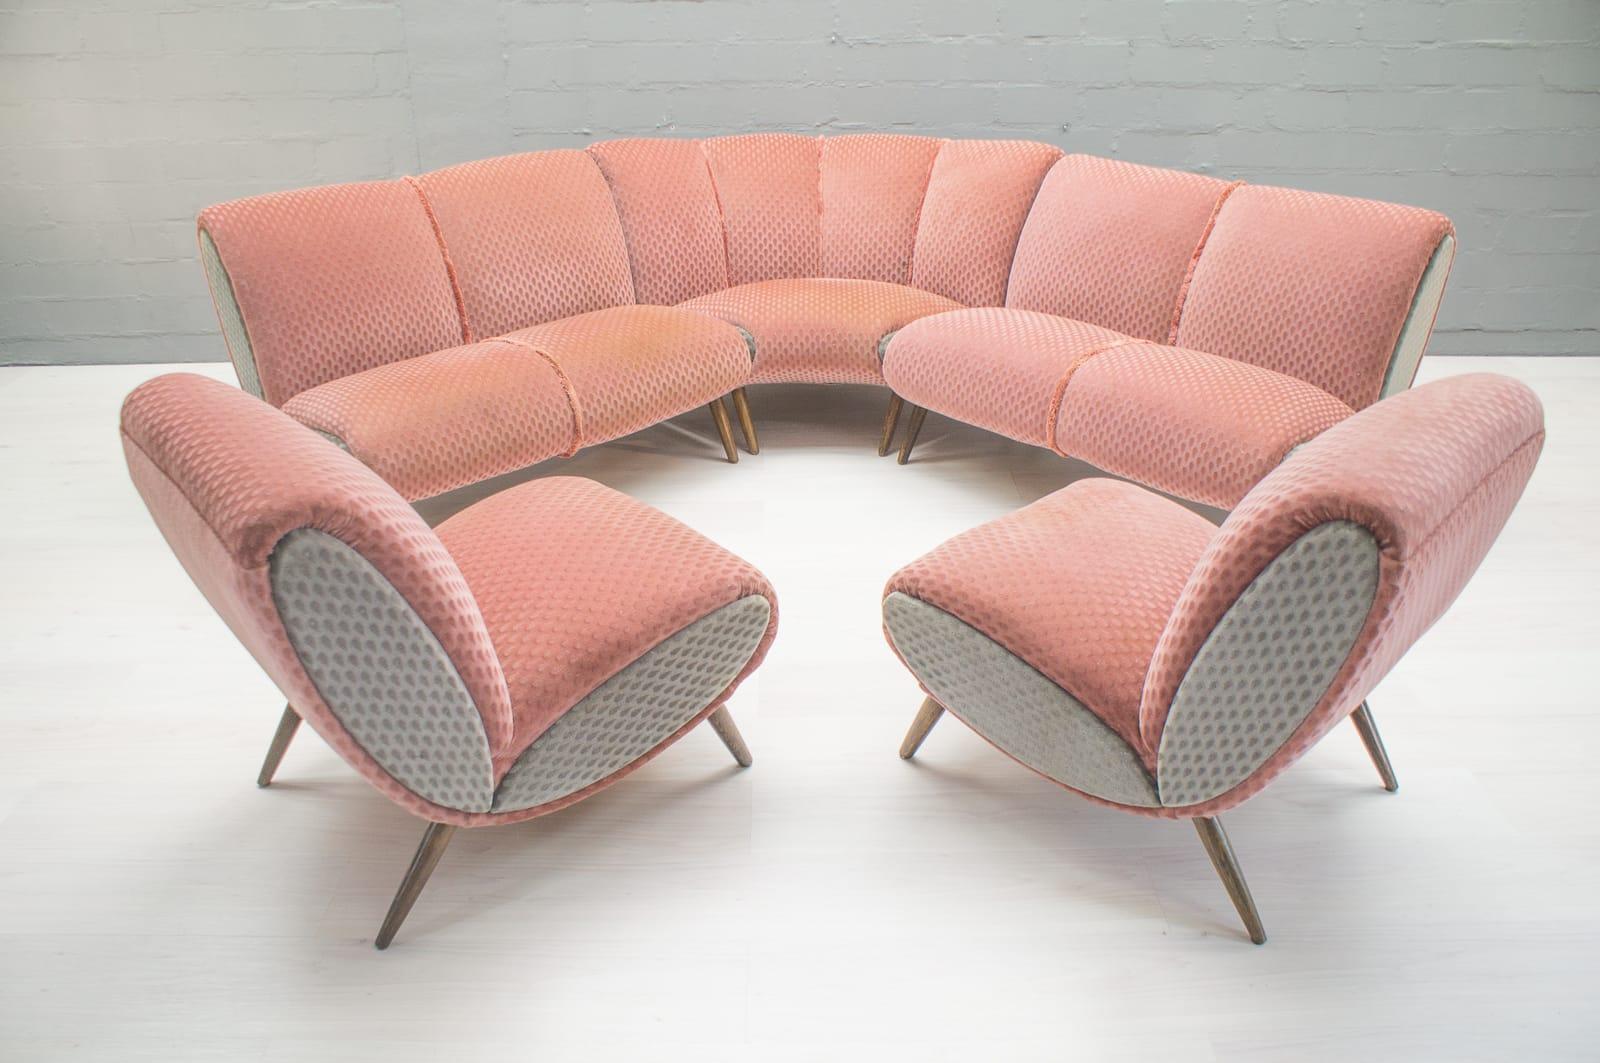 Fabric Extremely rare huge sofa set by Norman Bel Geddes from the 1950s, USA